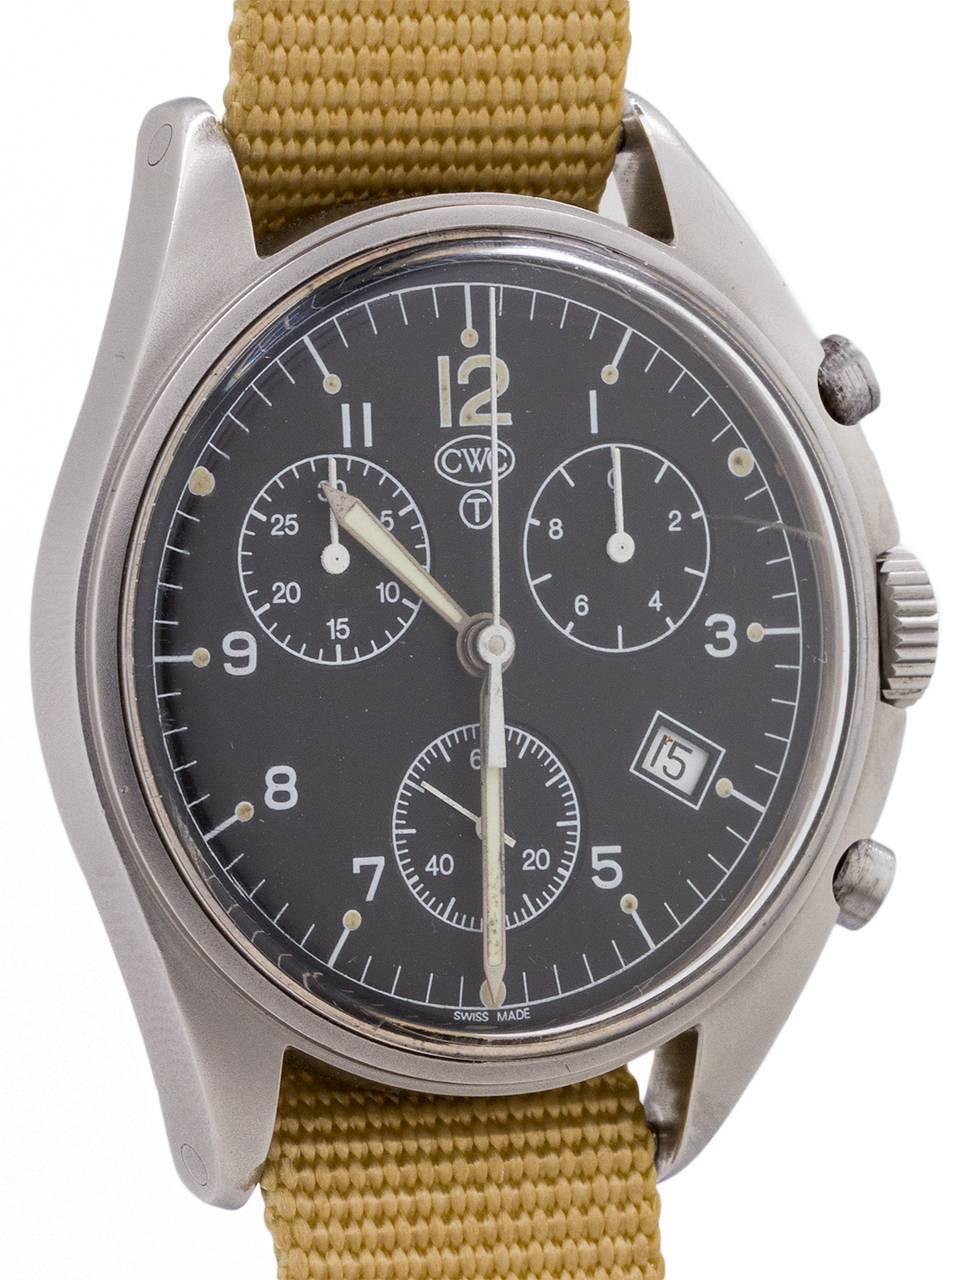 
Cabot Watch Company CWC Quartz Pilots chronograph watch, in stainless steel, circa 1990’s. This particular piece was supplied by CWC in London directly to the Belgian Air Force, proven by the caseback which reads “BAF/034” The steel of the case,